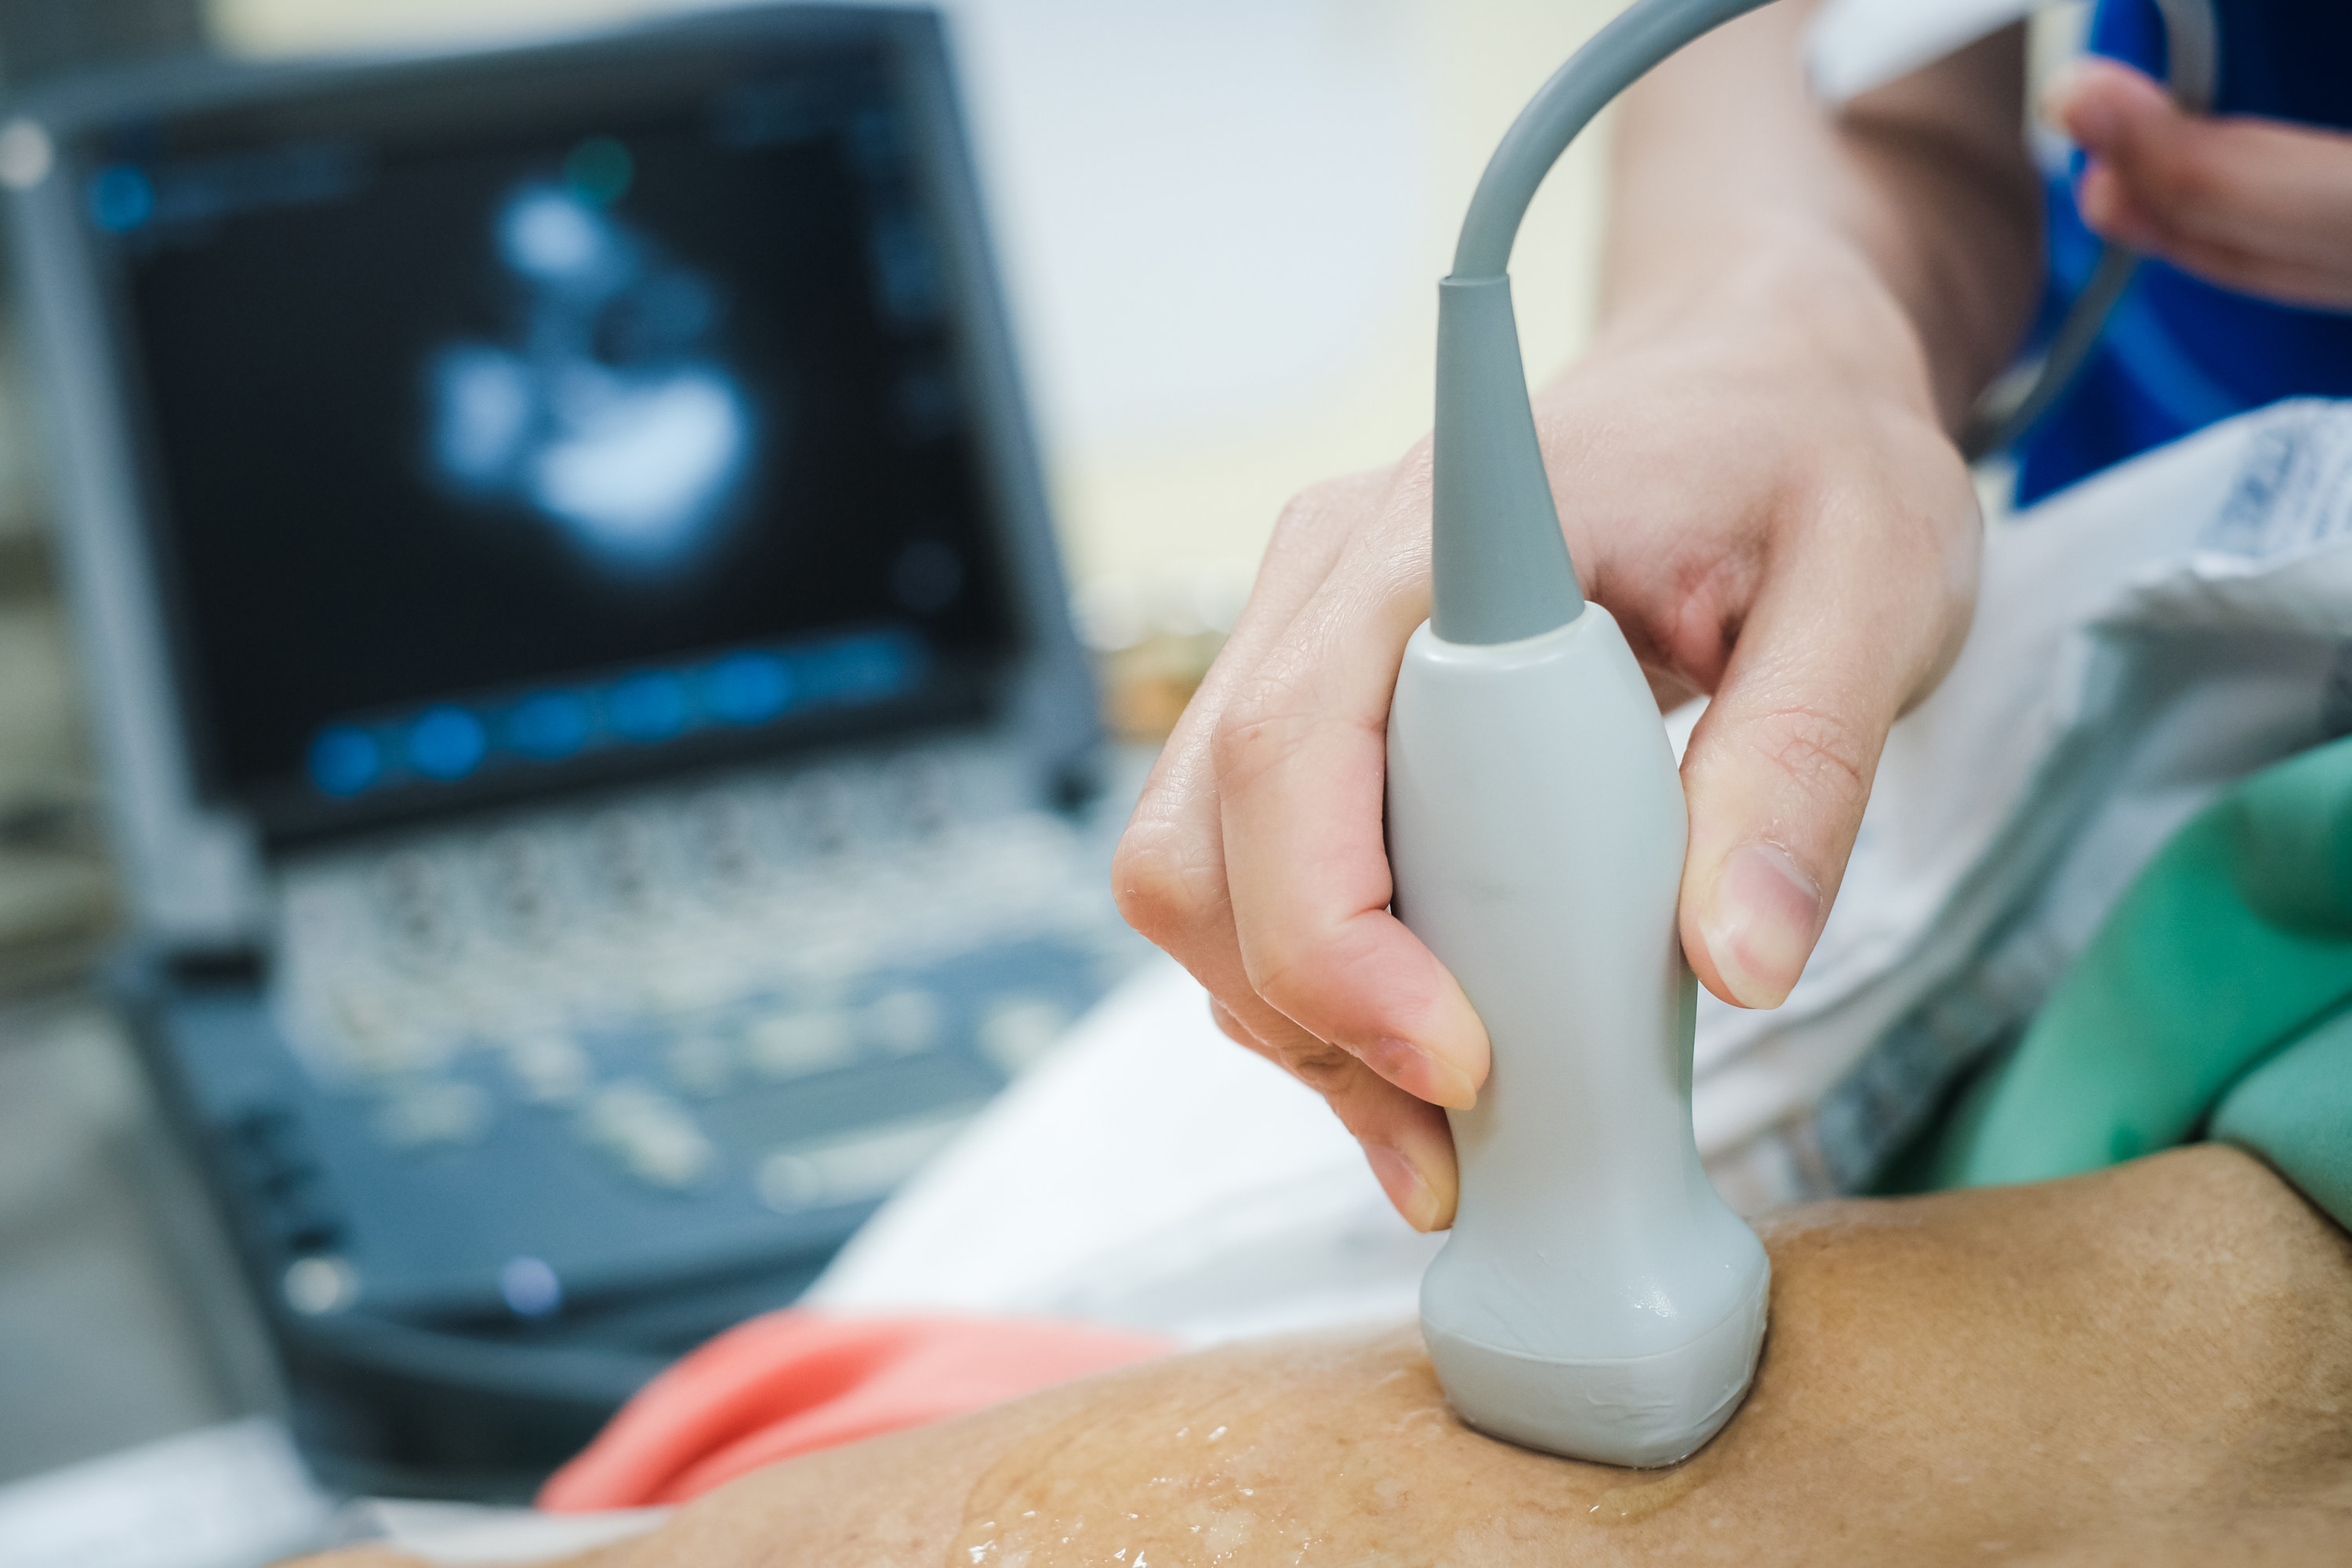 An ultrasound machine being used on a patient